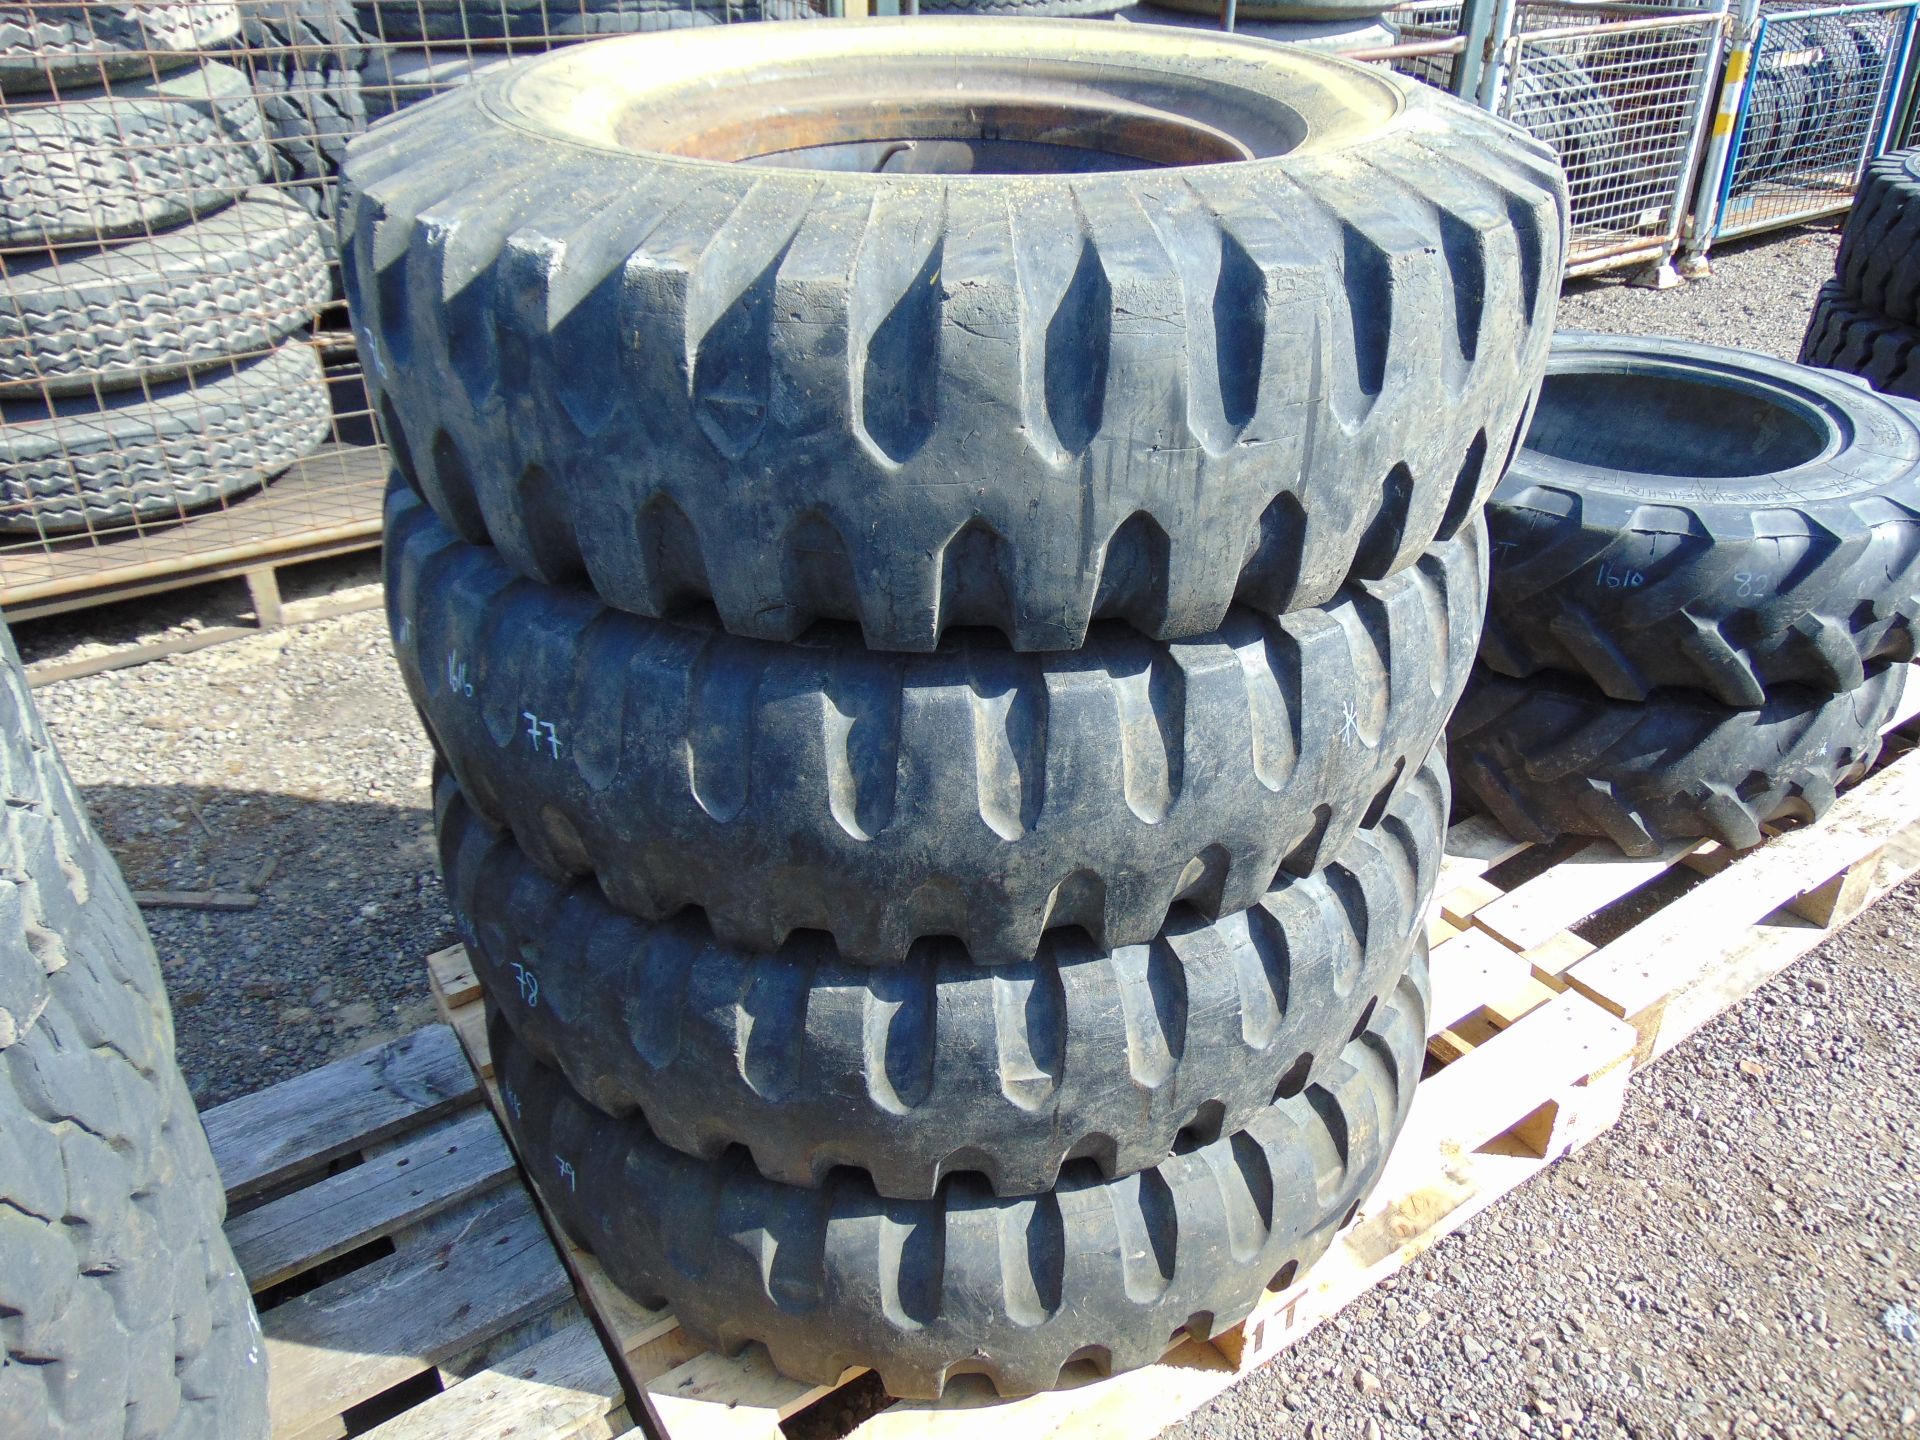 4 x Goodyear 12.00-20 14 Ply Tyres